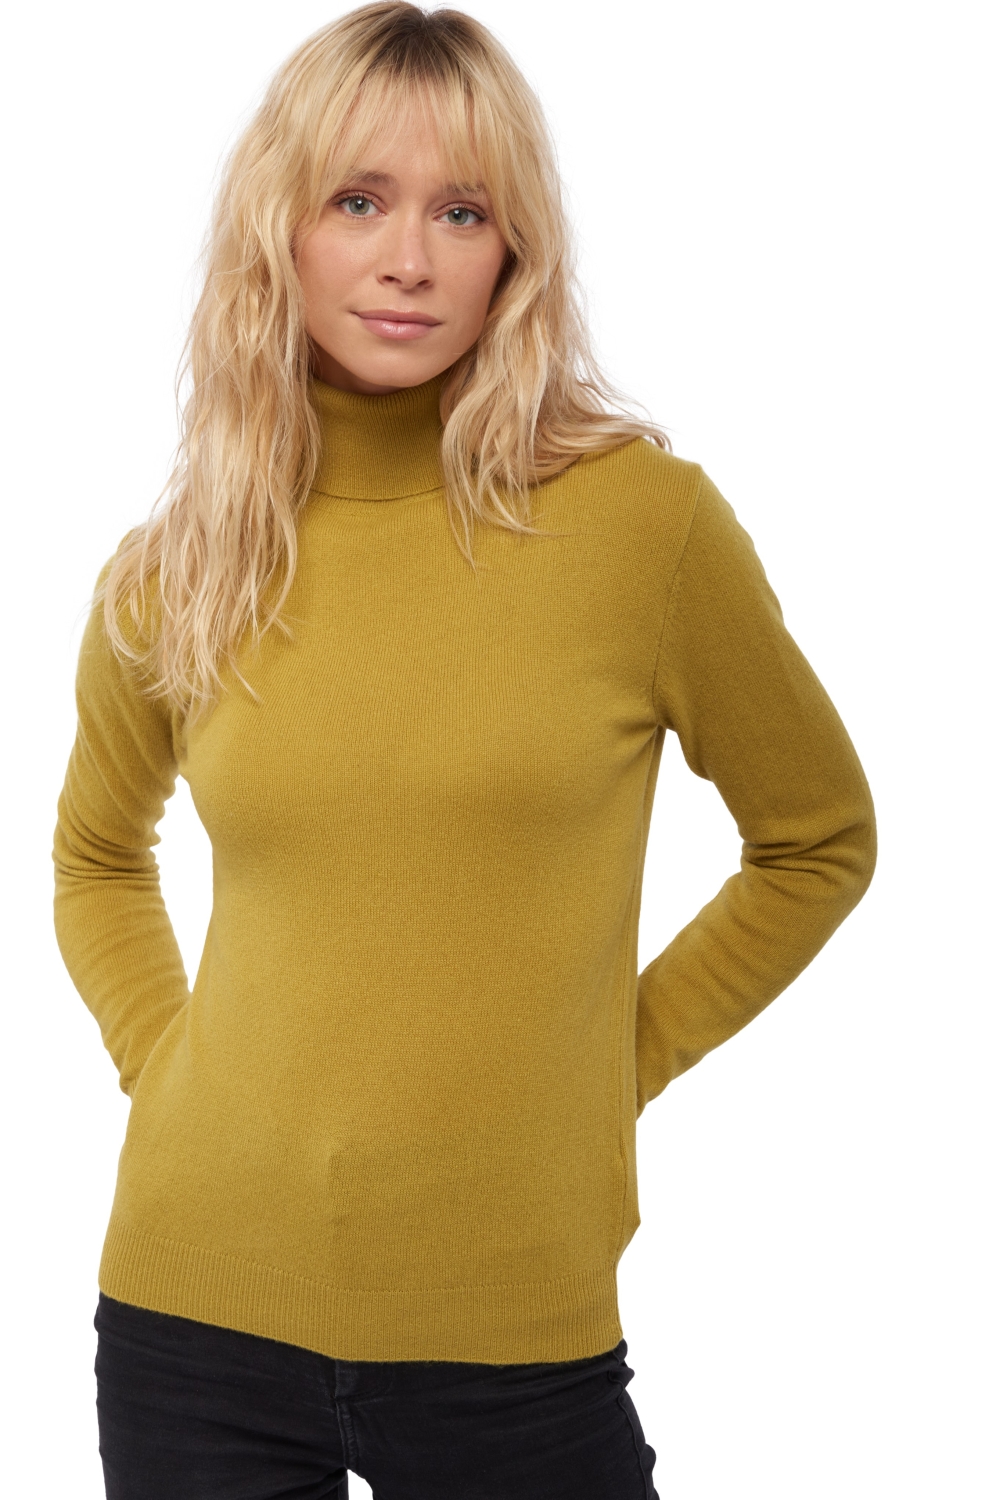 Cashmere ladies basic sweaters at low prices tale first caterpillar l